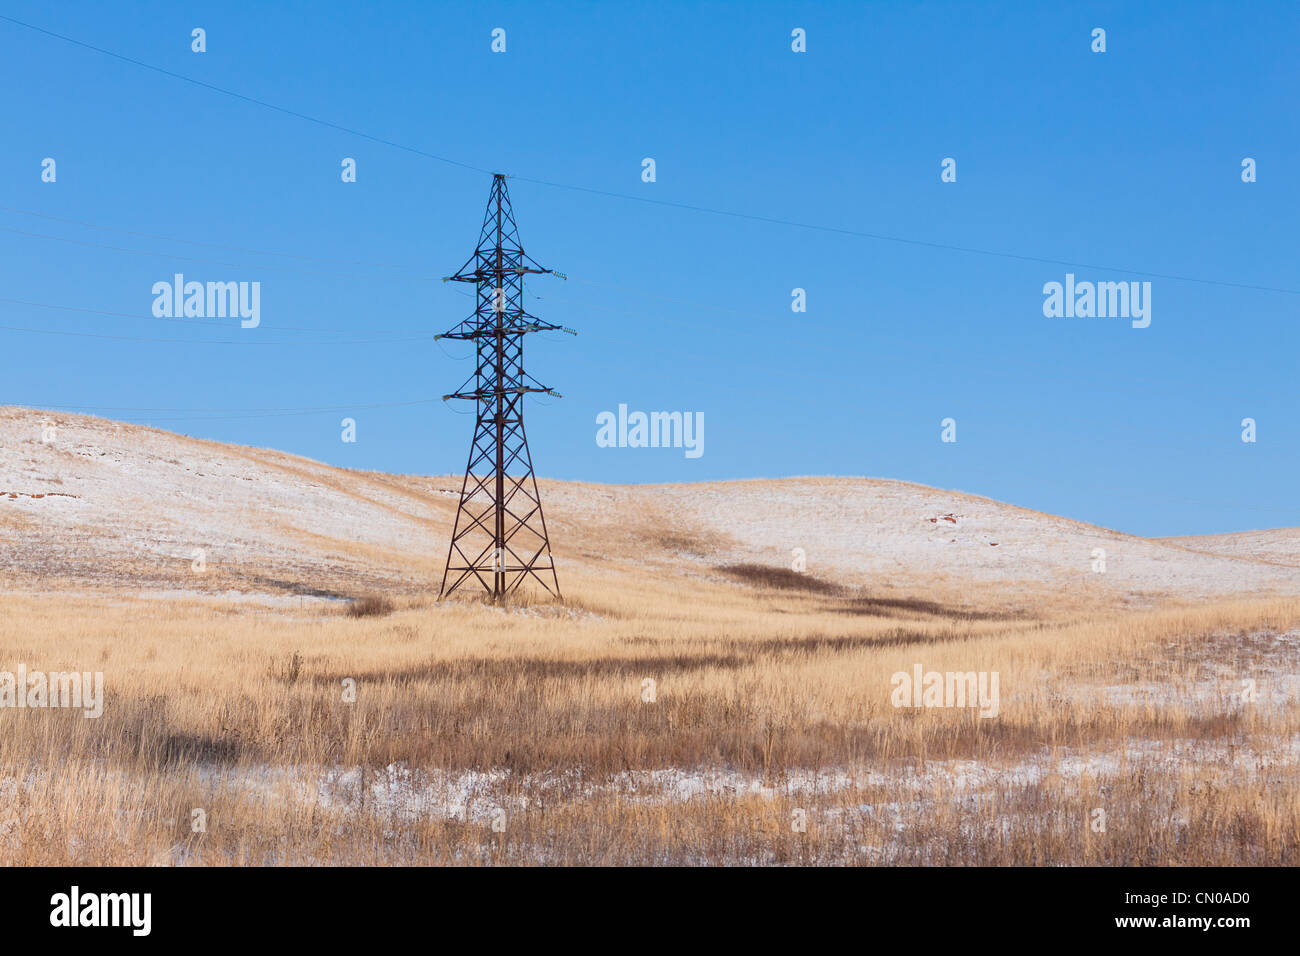 Reliance power lines in the winter steppe Stock Photo